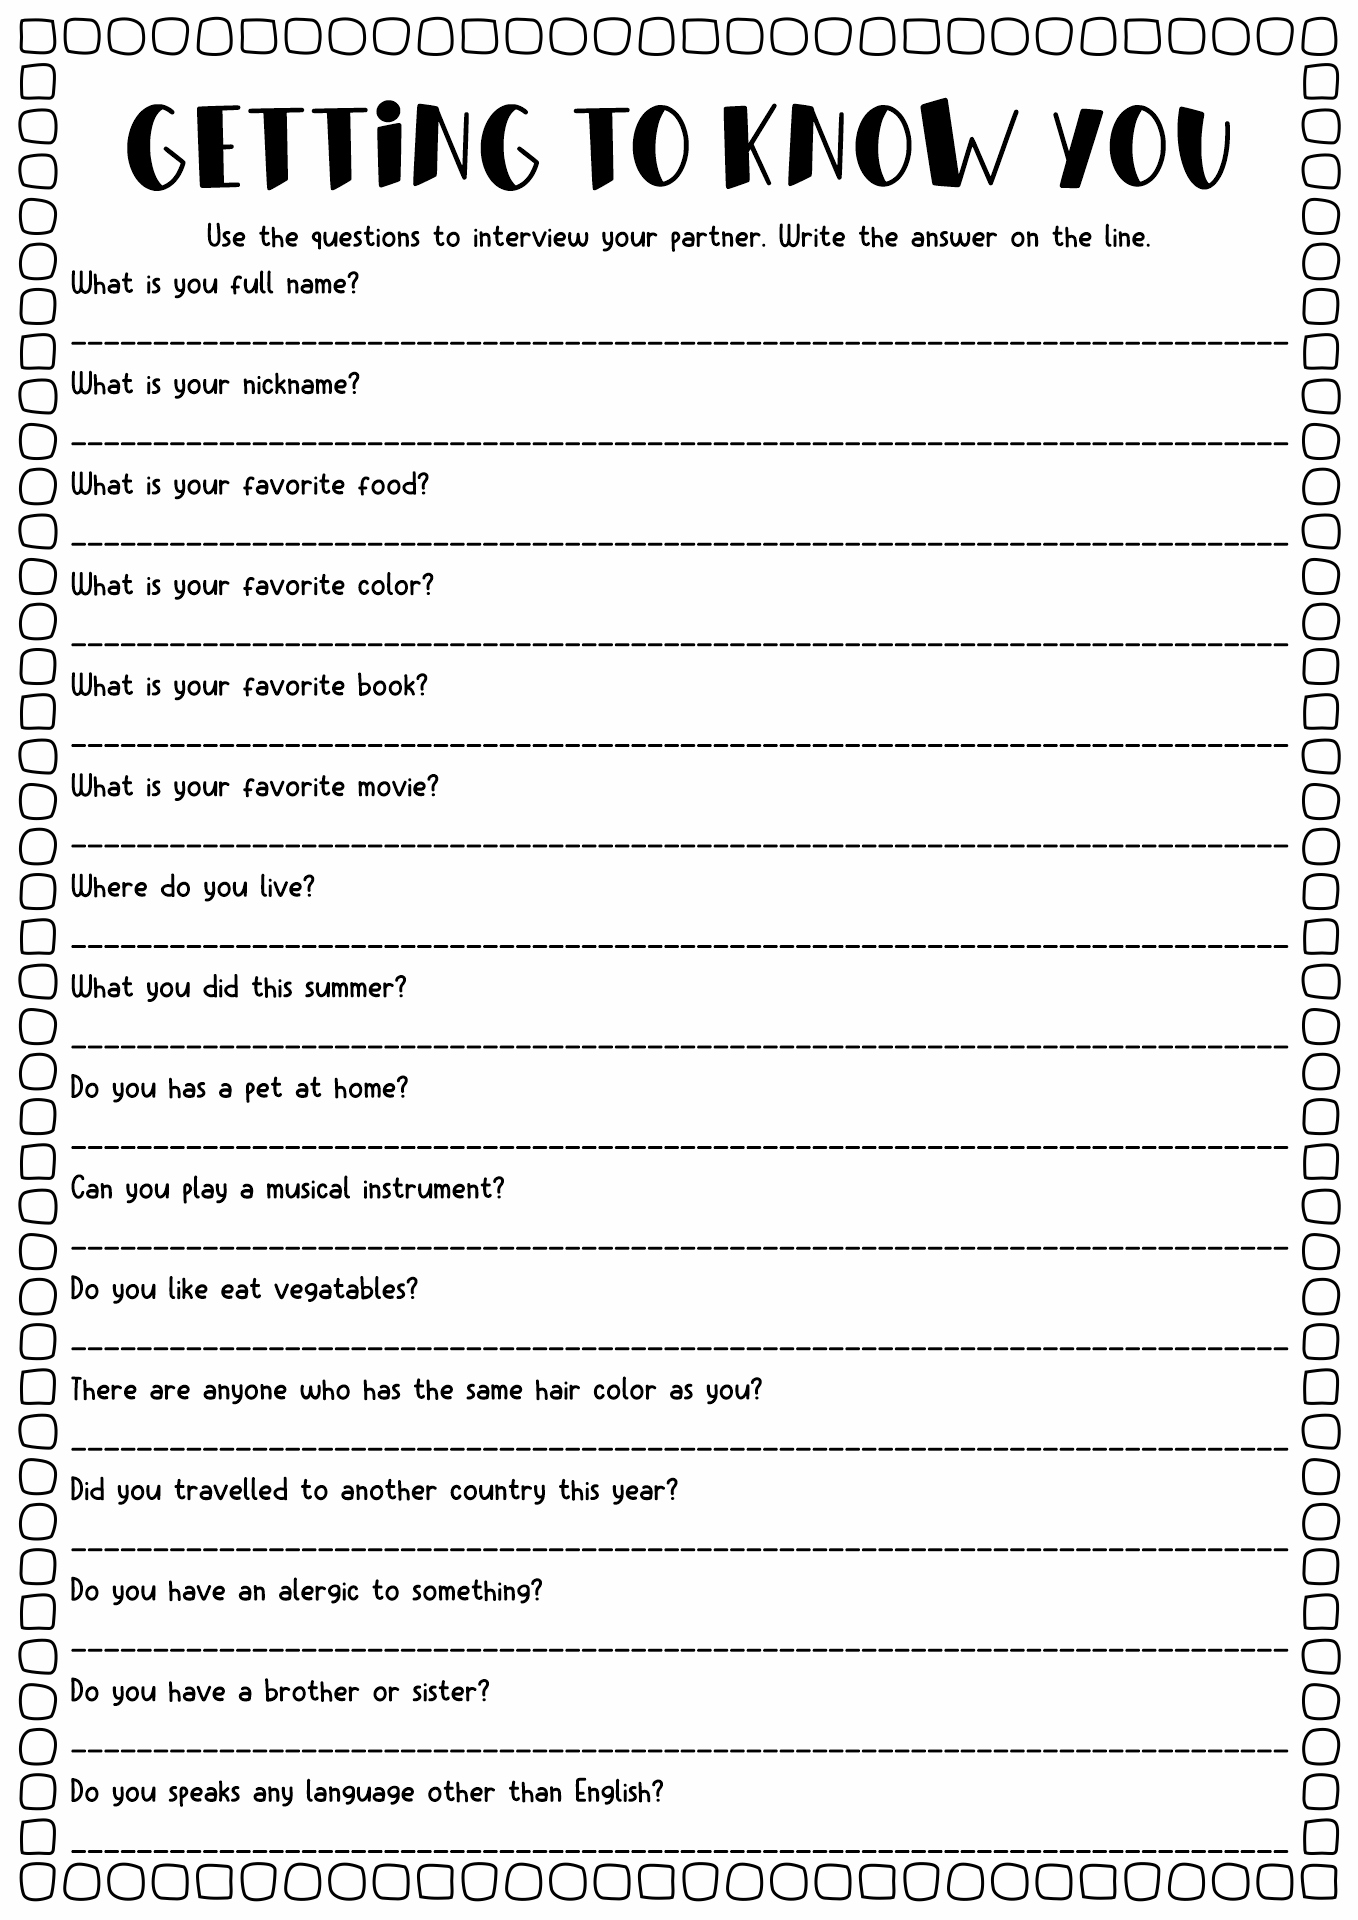 13 Getting To Know You Worksheets 3rd Grade - Free PDF at worksheeto.com